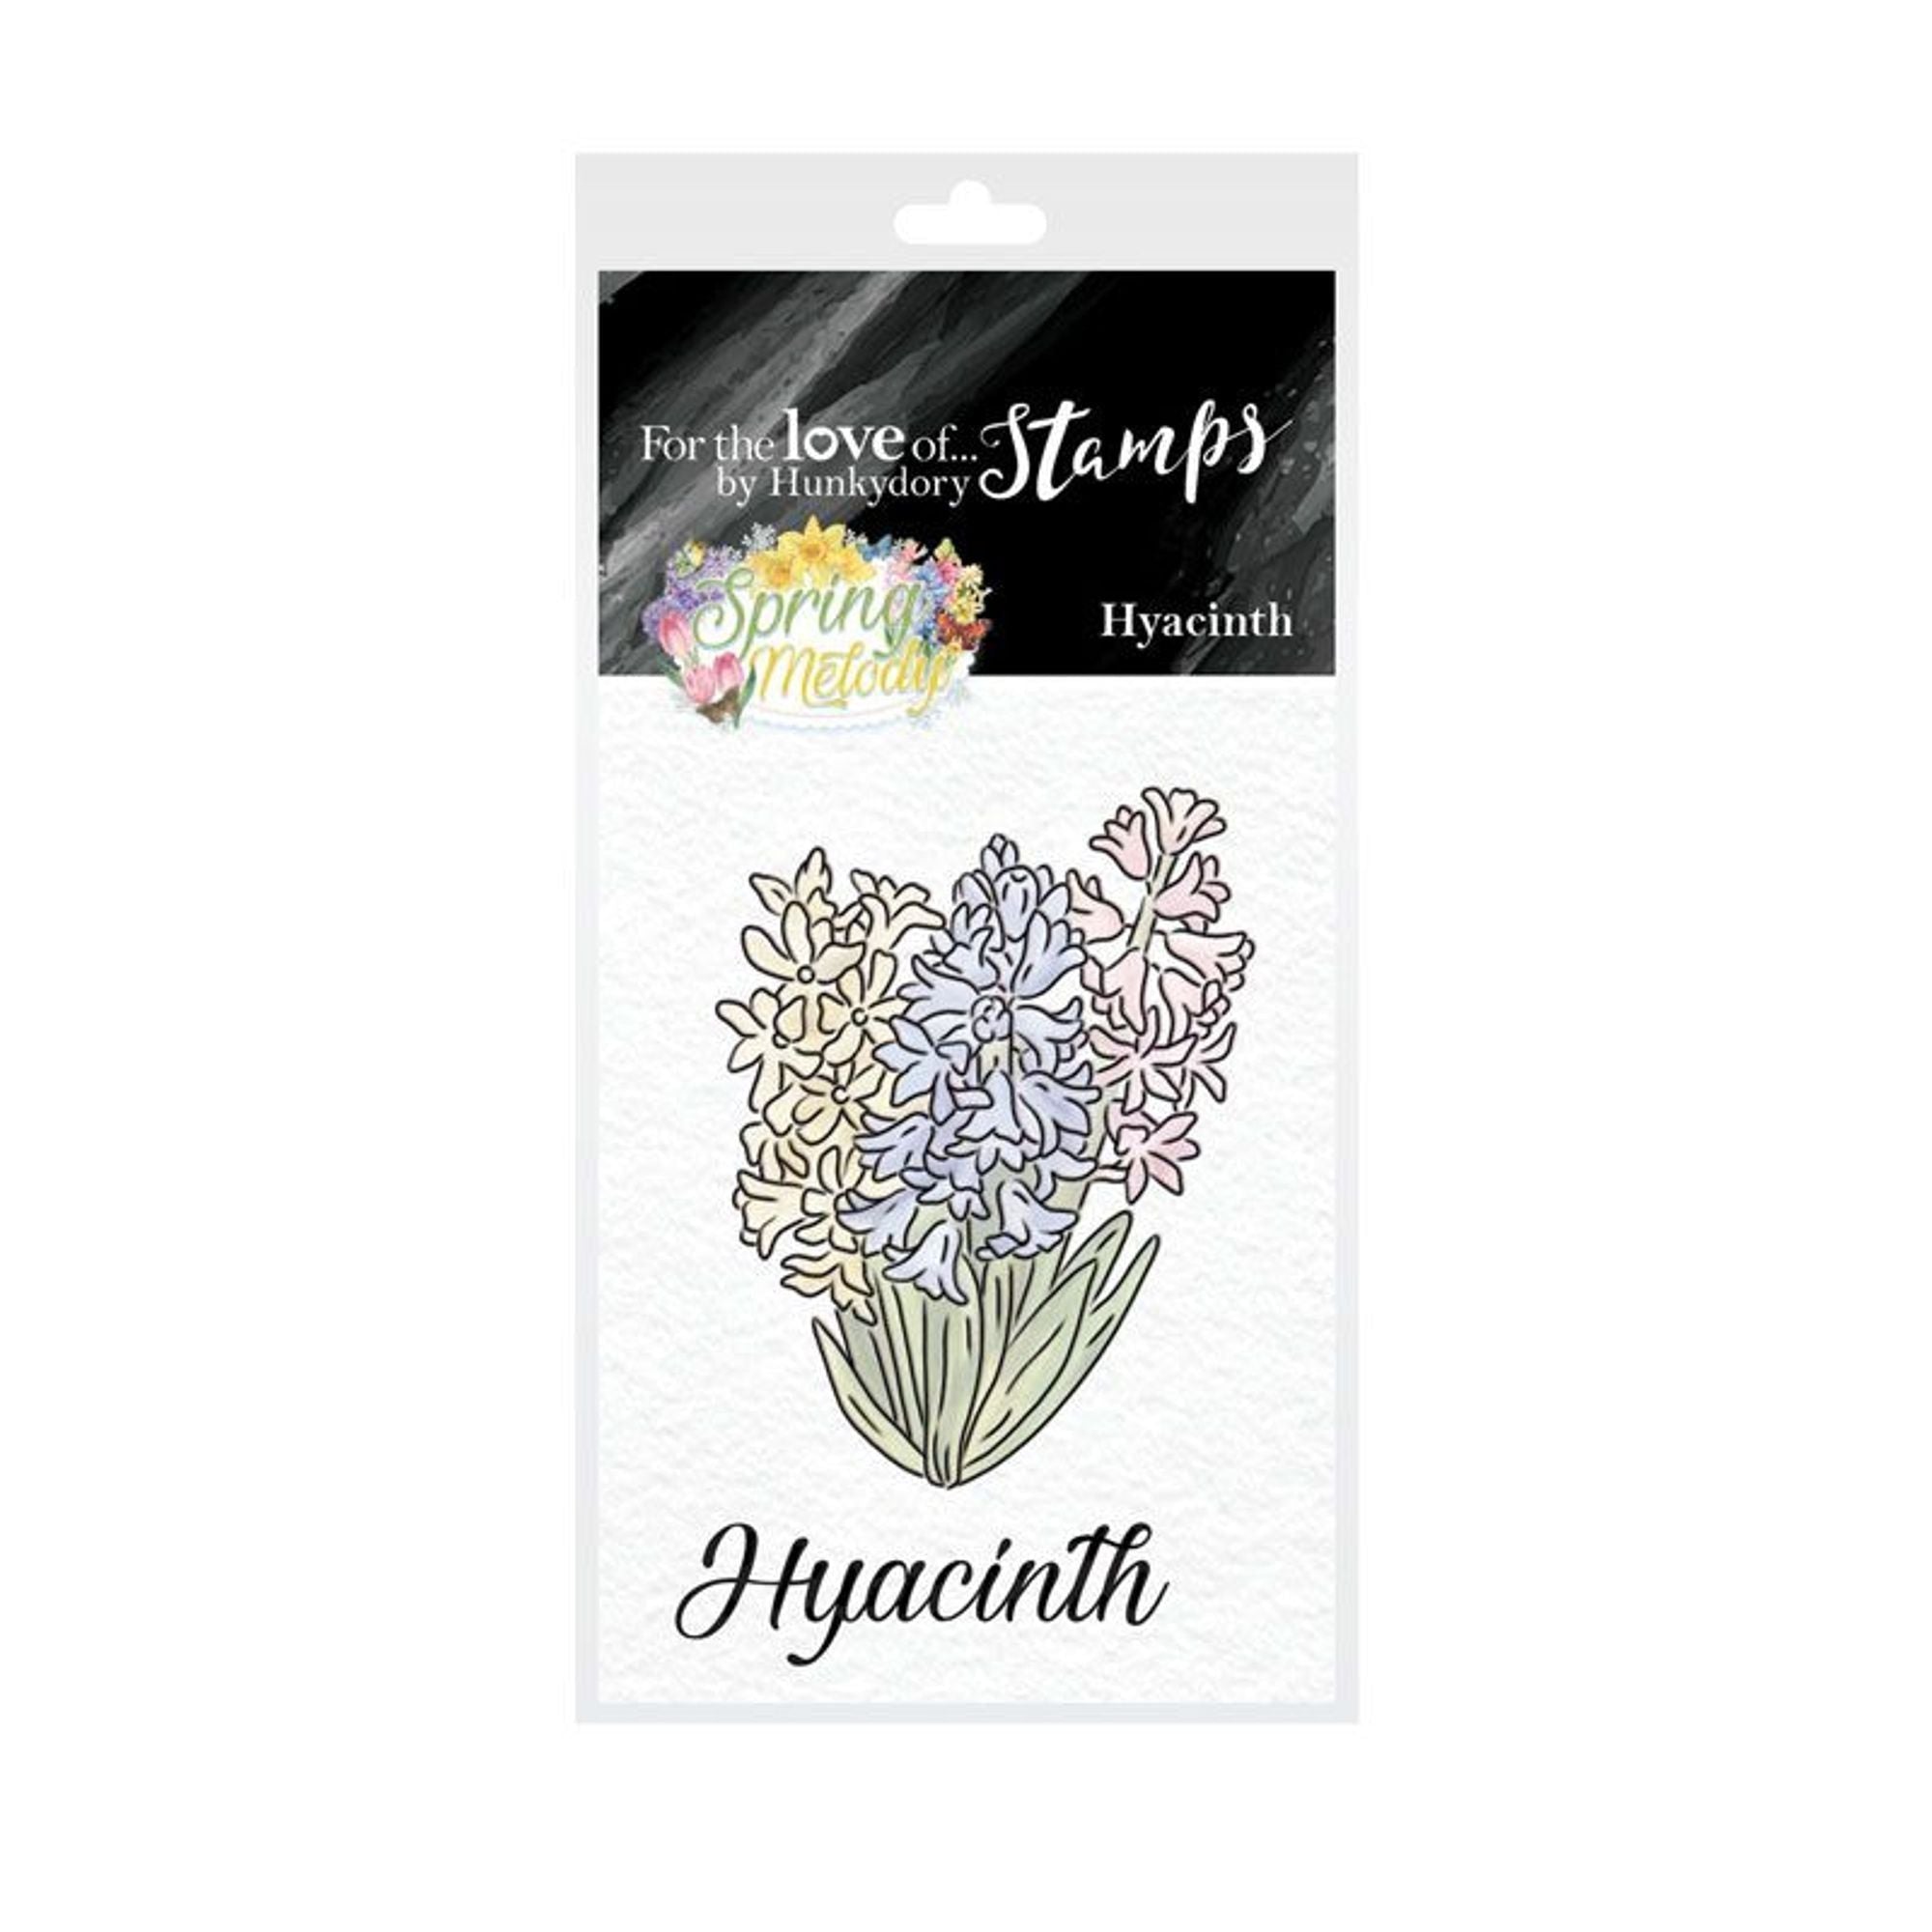 For the Love of Stamps - Mini Stamps - Hyacinth